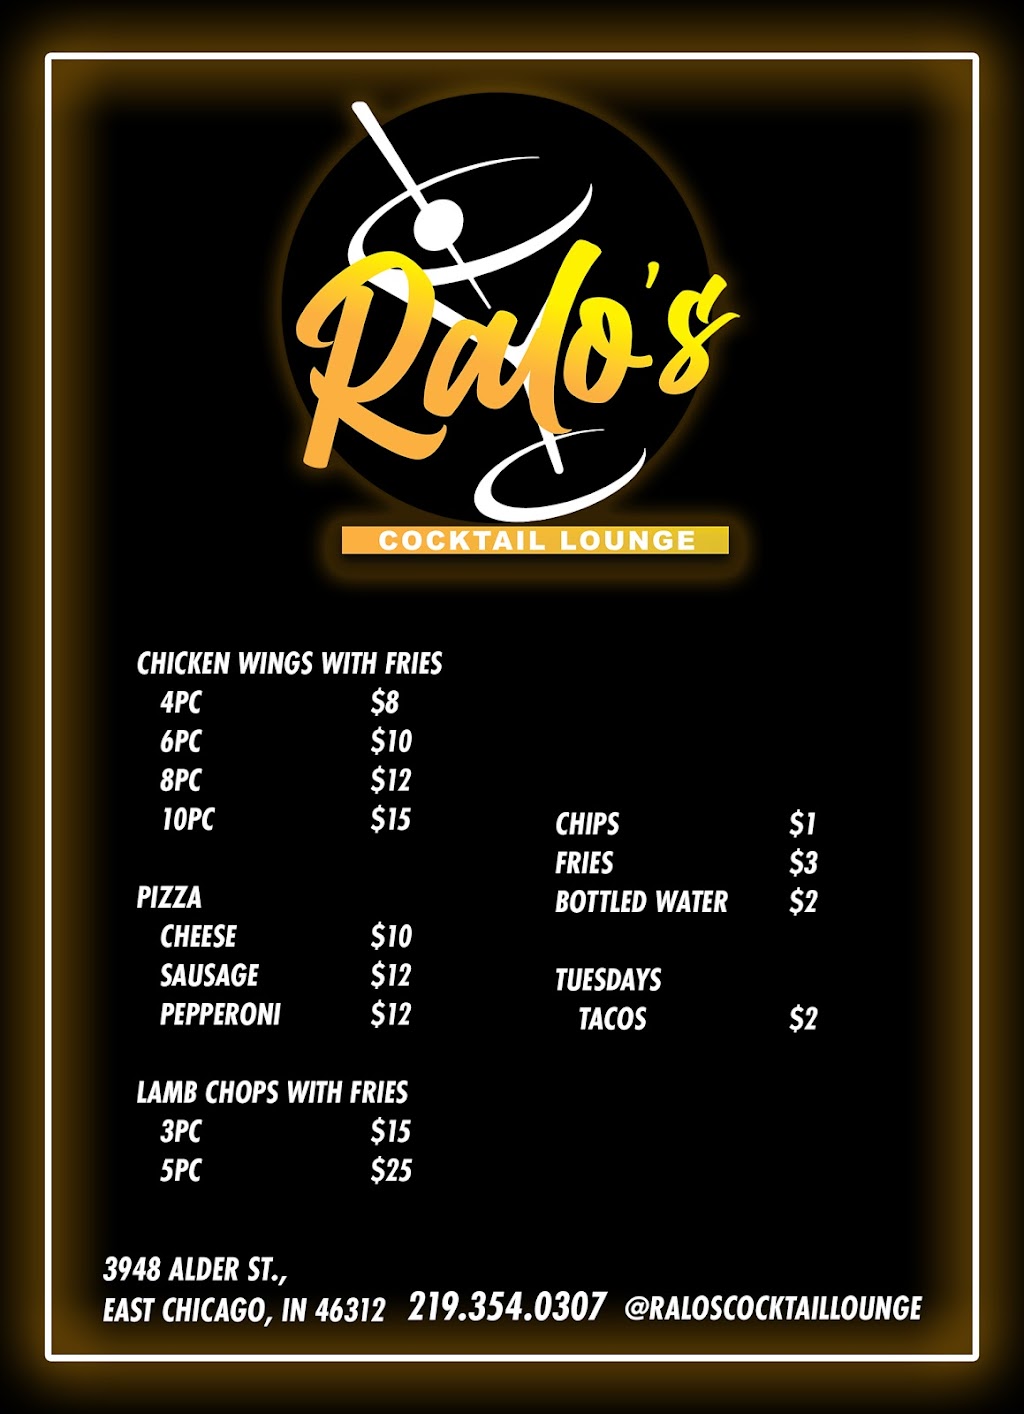 Ralos Cocktail Lounge | 3948 Alder St, East Chicago, IN 46312 | Phone: (219) 354-0307